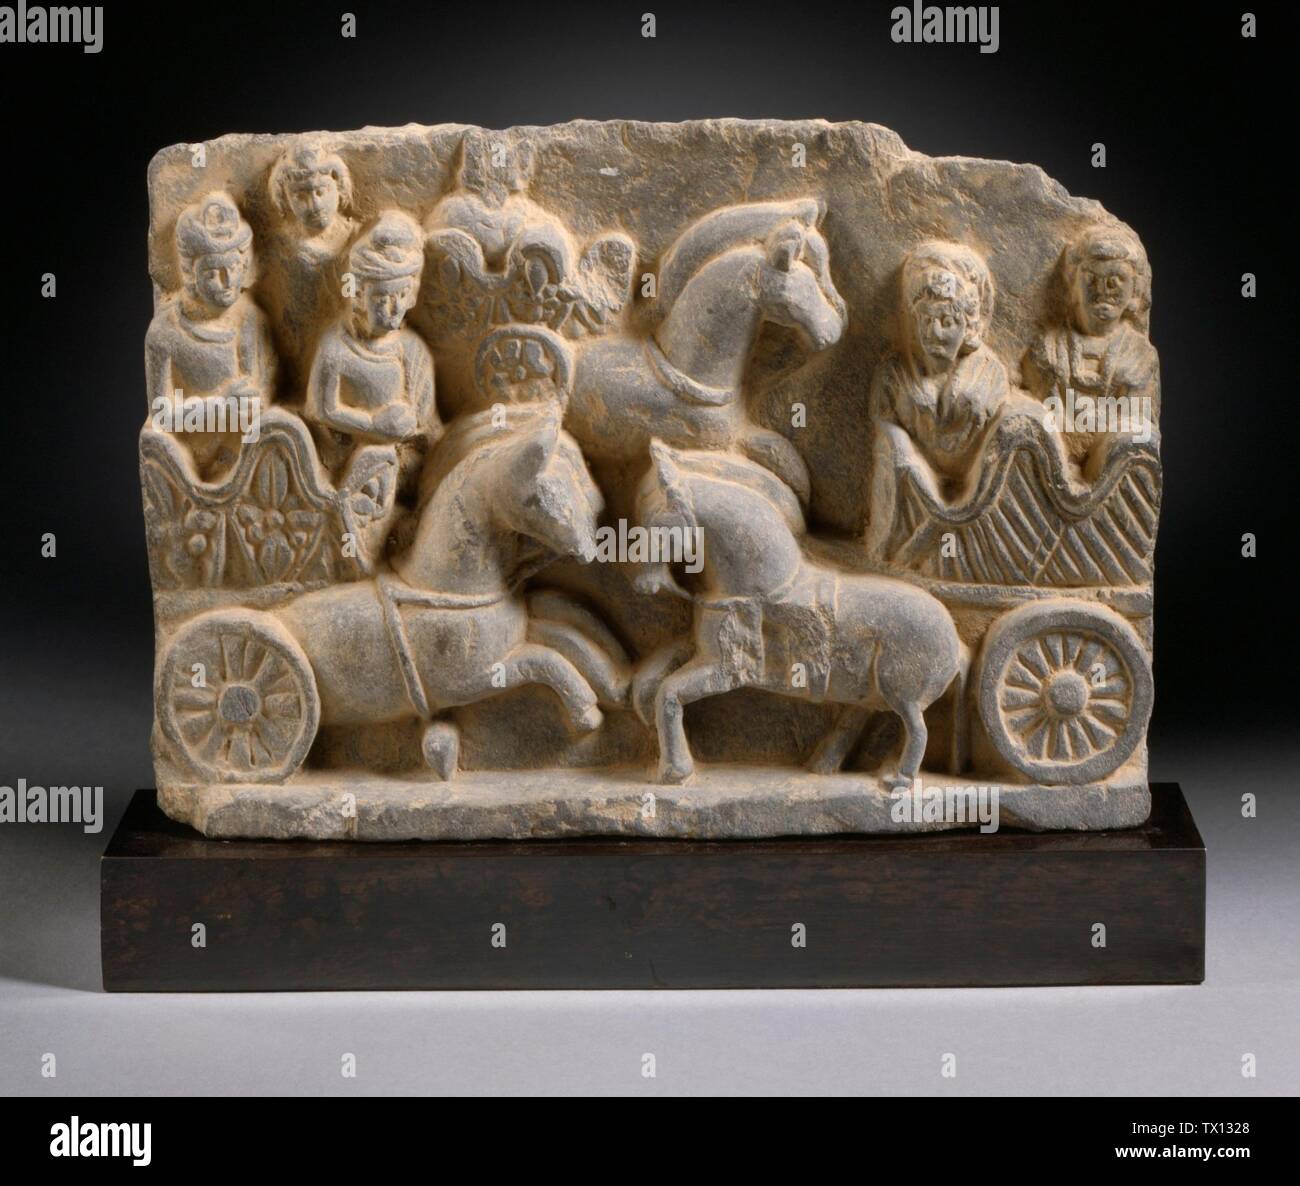 Chariot Scene;  Pakistan, Gandhara region, 3rd century Sculpture Gray schist 11 7/8 x 8 1/8 x 1 3/4 in. (30.16 x 20.63 x 4.45 cm) Anonymous gift (M.89.159.2) South and Southeast Asian Art; 3rd century date QS:P571,+250-00-00T00:00:00Z/7; Stock Photo